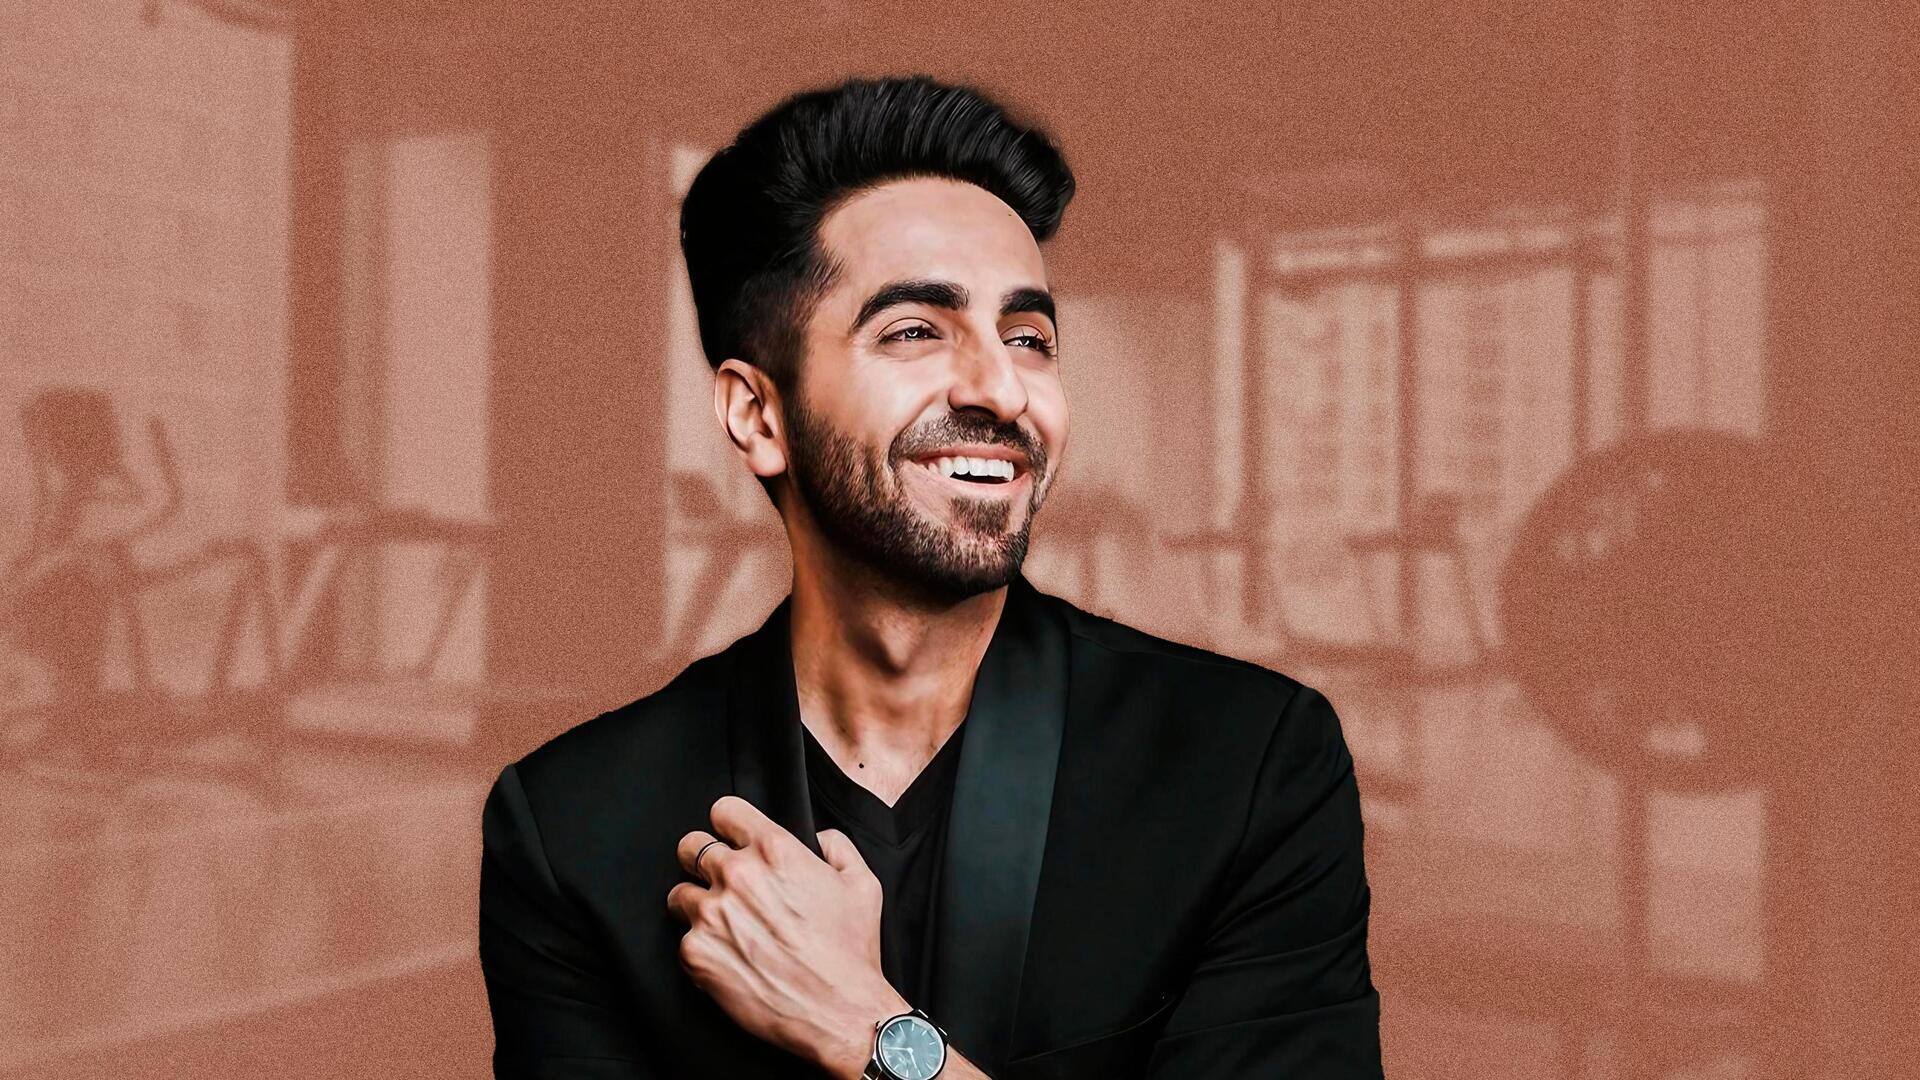 Happy birthday, Ayushmann Khurrana! Obsessing over the lad's fittest looks